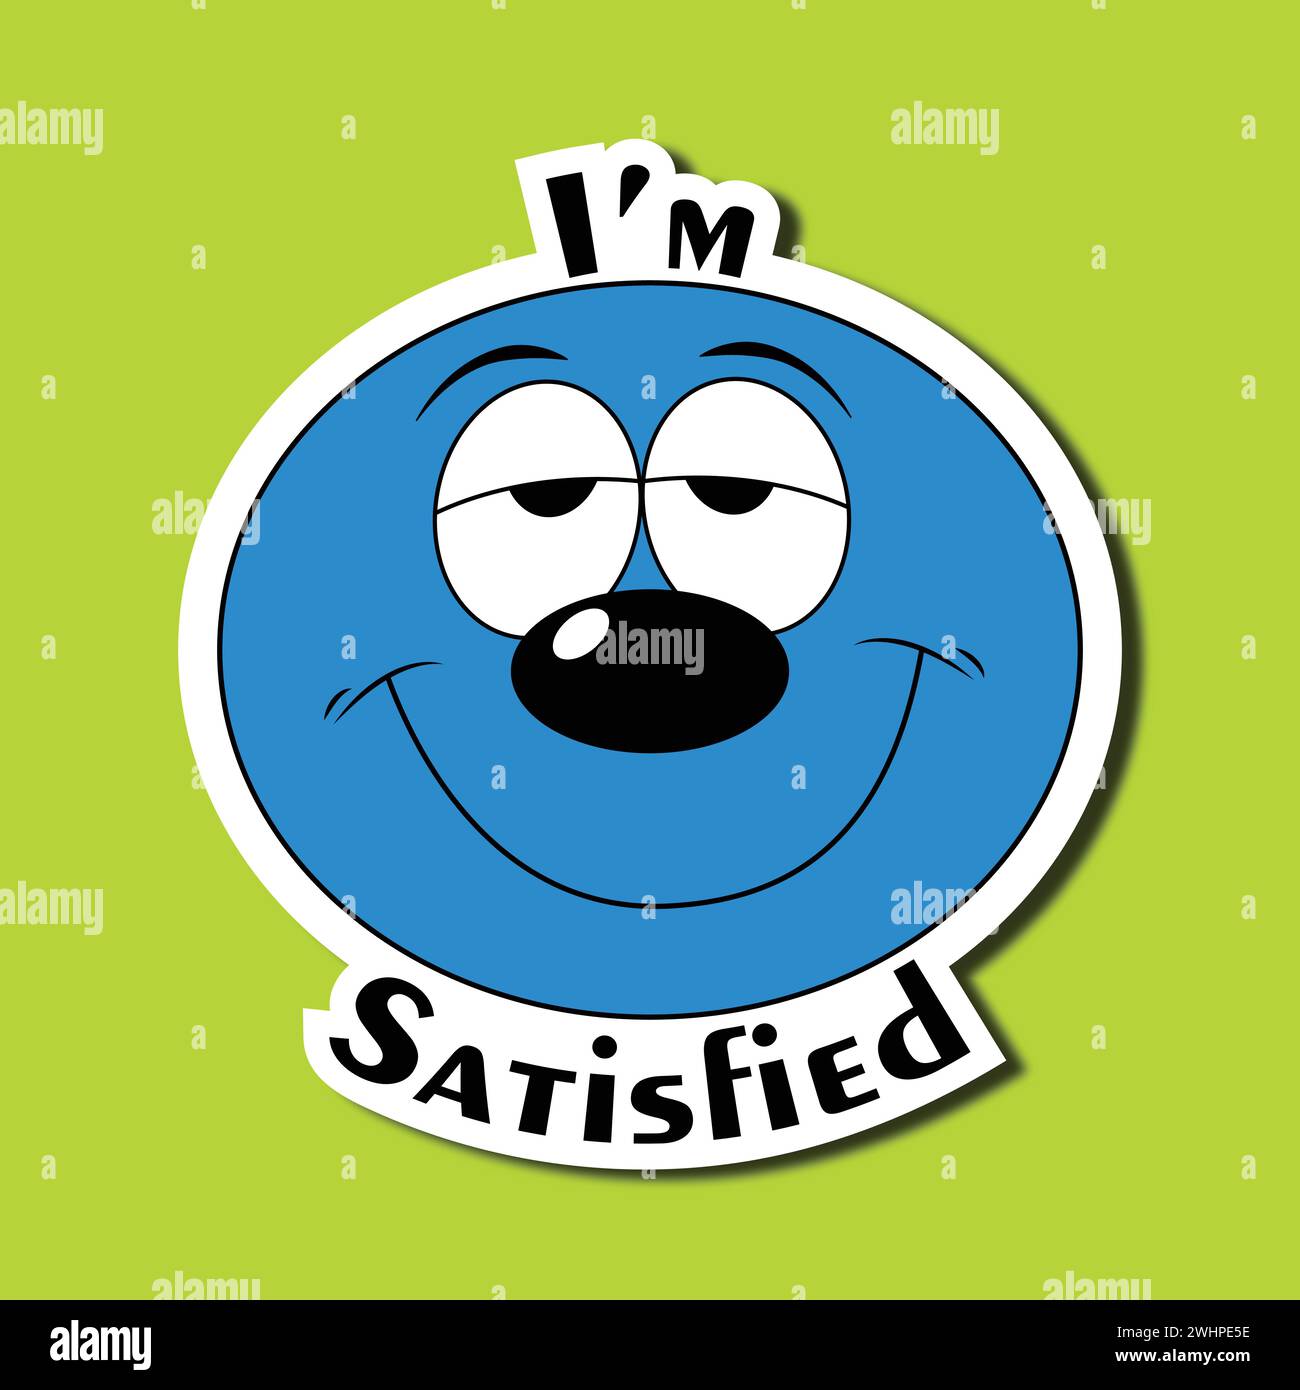 Funny face sticker. Emoticon with a wide smile. Inscription: I'm satisfied Stock Vector